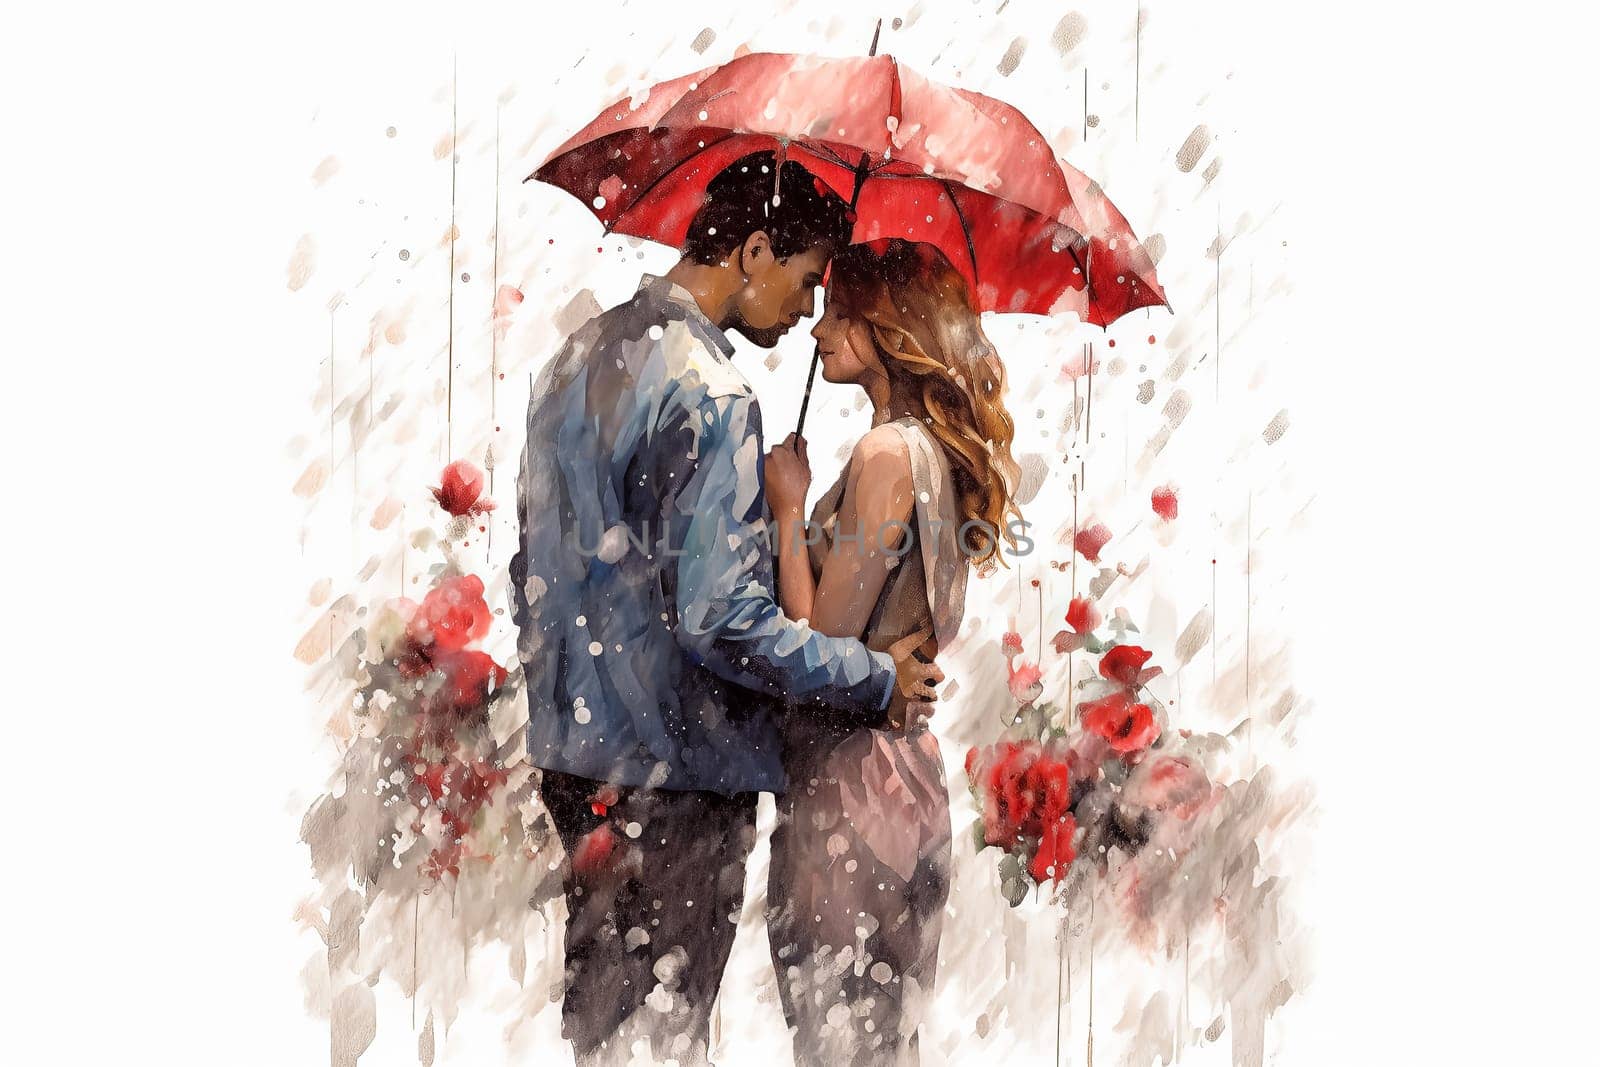 a watercolor illustration depicts a couple strolling outdoors after the rain. by Alla_Morozova93